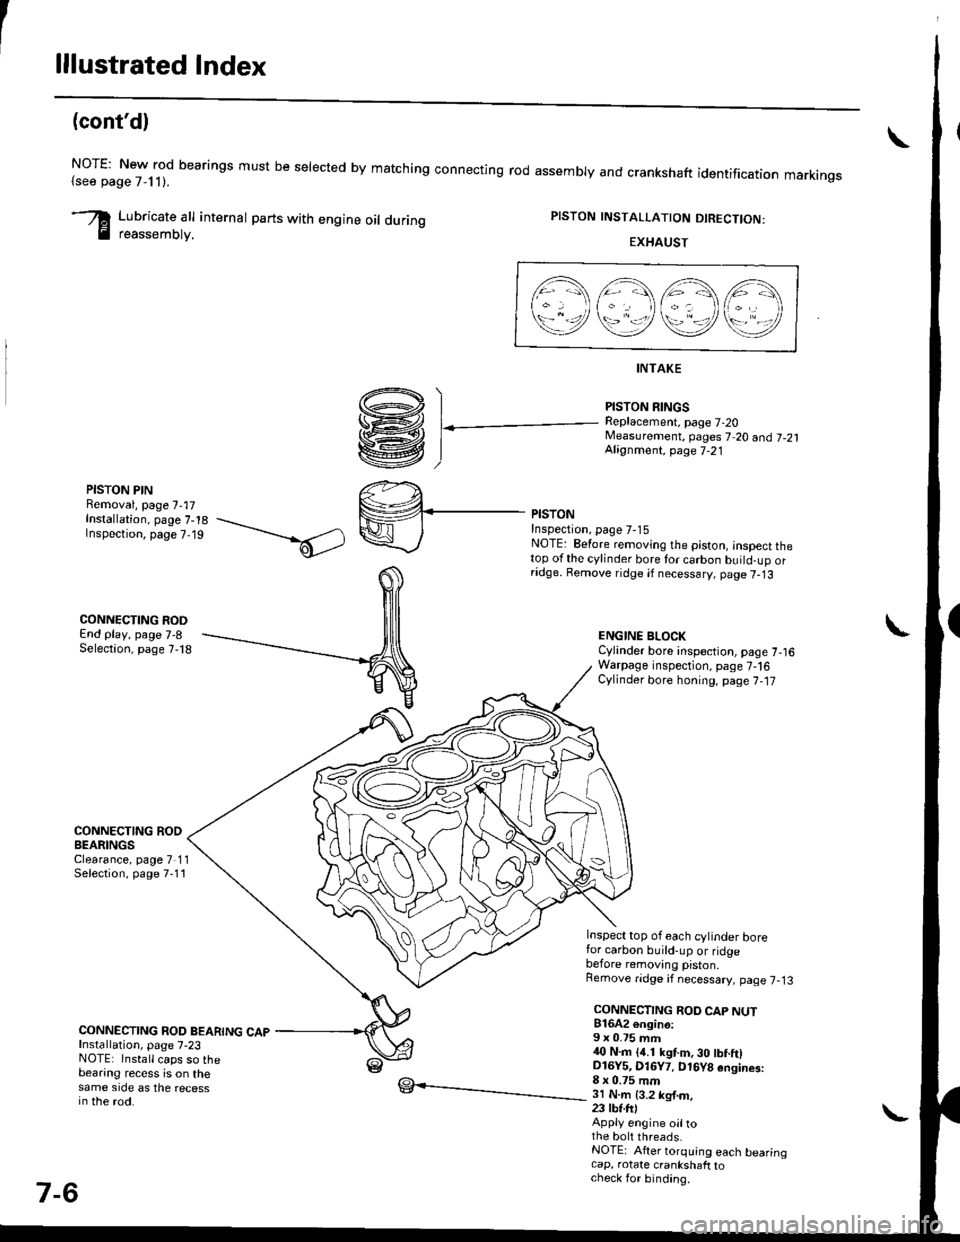 HONDA CIVIC 1997 6.G Workshop Manual lllustrated Index
(contd)
NOTE: New rod bearings must be selected by matching connecting rod assembly and crankshaft(see page 7,11).identification markings
Lubricate all internal parts with engine oi